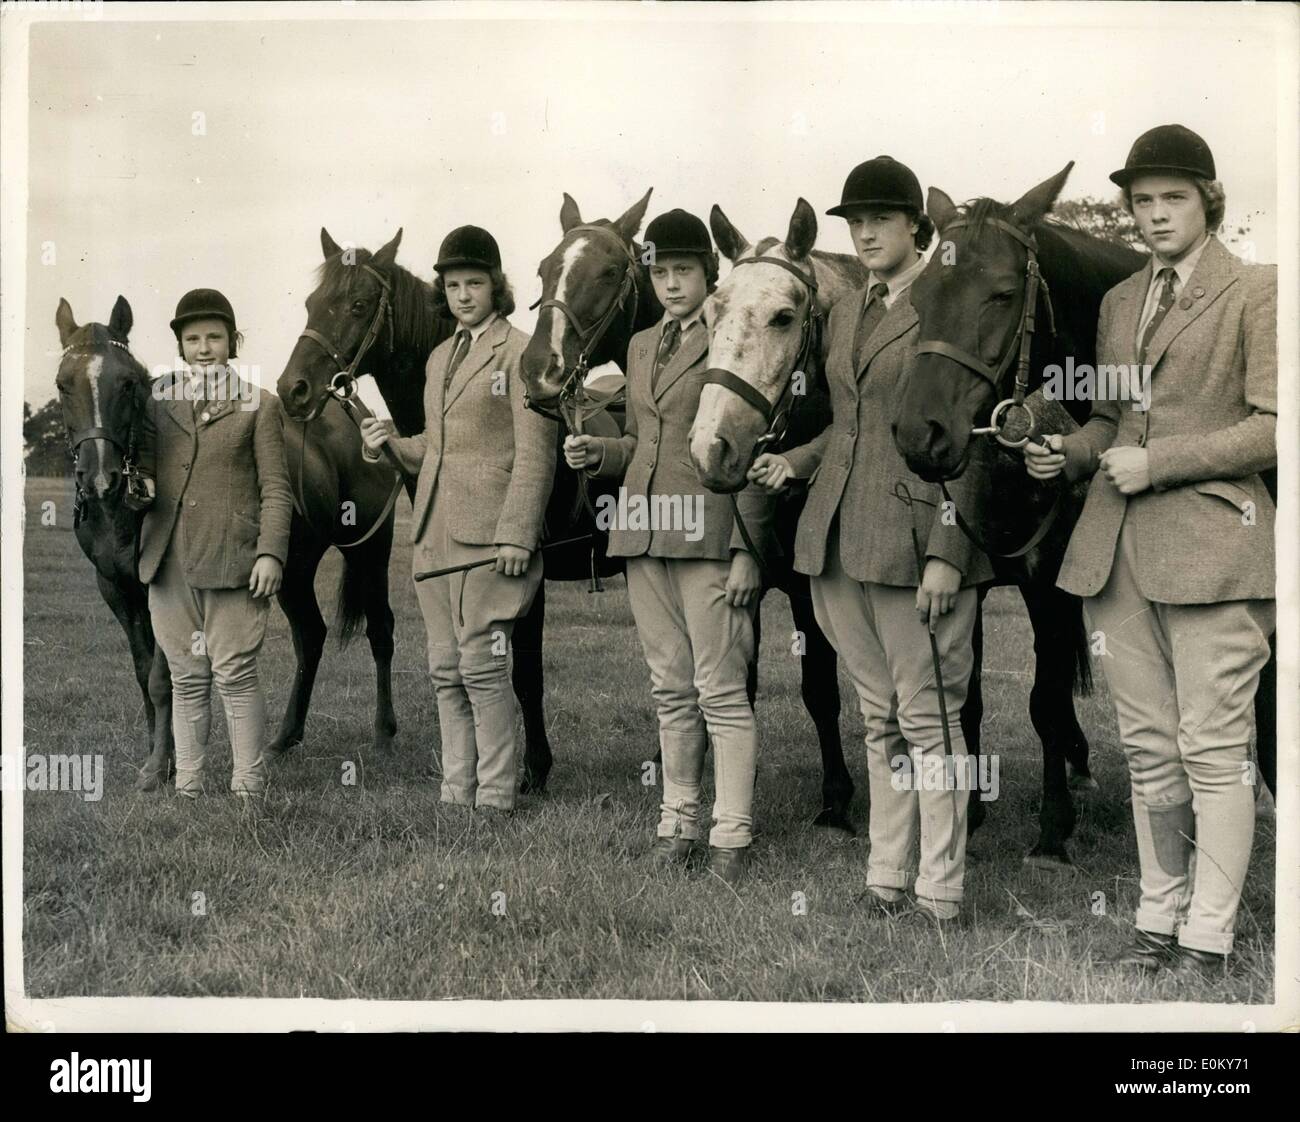 Nov. 11, 1952 - Five Riding Sisters: The five riding daughters of Mr. and Mrs. J.D. Aysh, of Herdham, near Pulberough, Sussex, won 162 prizes and trophies during the Gymkhana and horse Show season- and have now started riding with the hunts. Picture Shows: (Left to Right): Sonia aged 11, with ''Wendy'', Laraine, 14, with ''Joe'', Veronica, 15, with ''Black Patrick'', Rosalie, aged 17 with ''steel'' and Diana, 19, with ''Rosette'', seen yesterday before exercising their horses. Stock Photo